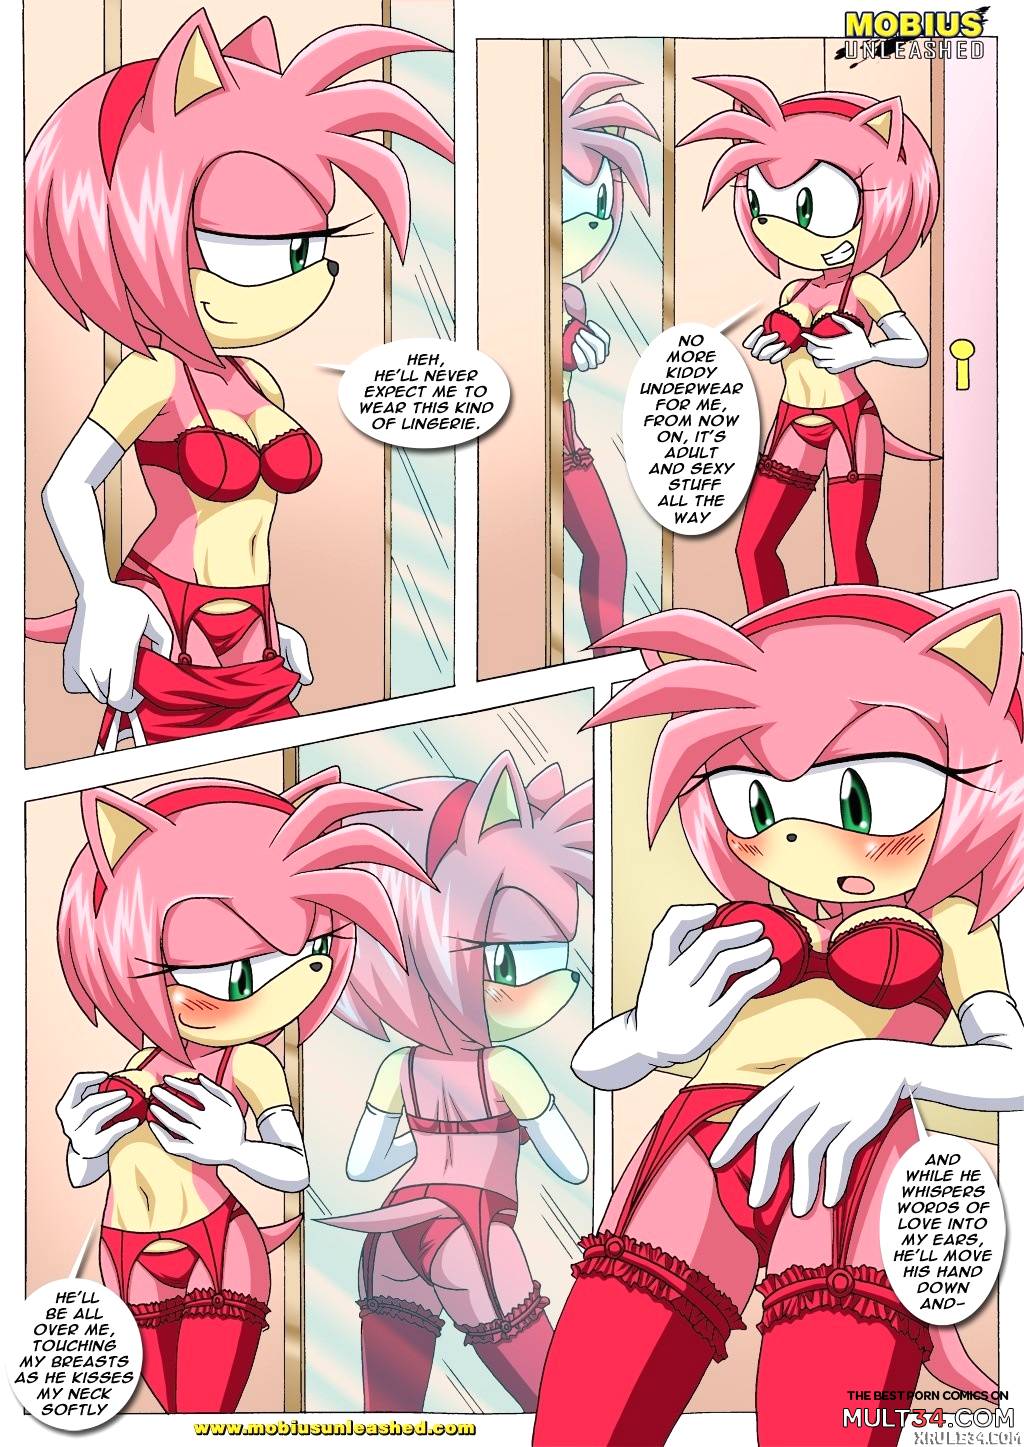 Amy's Fantasy page 3